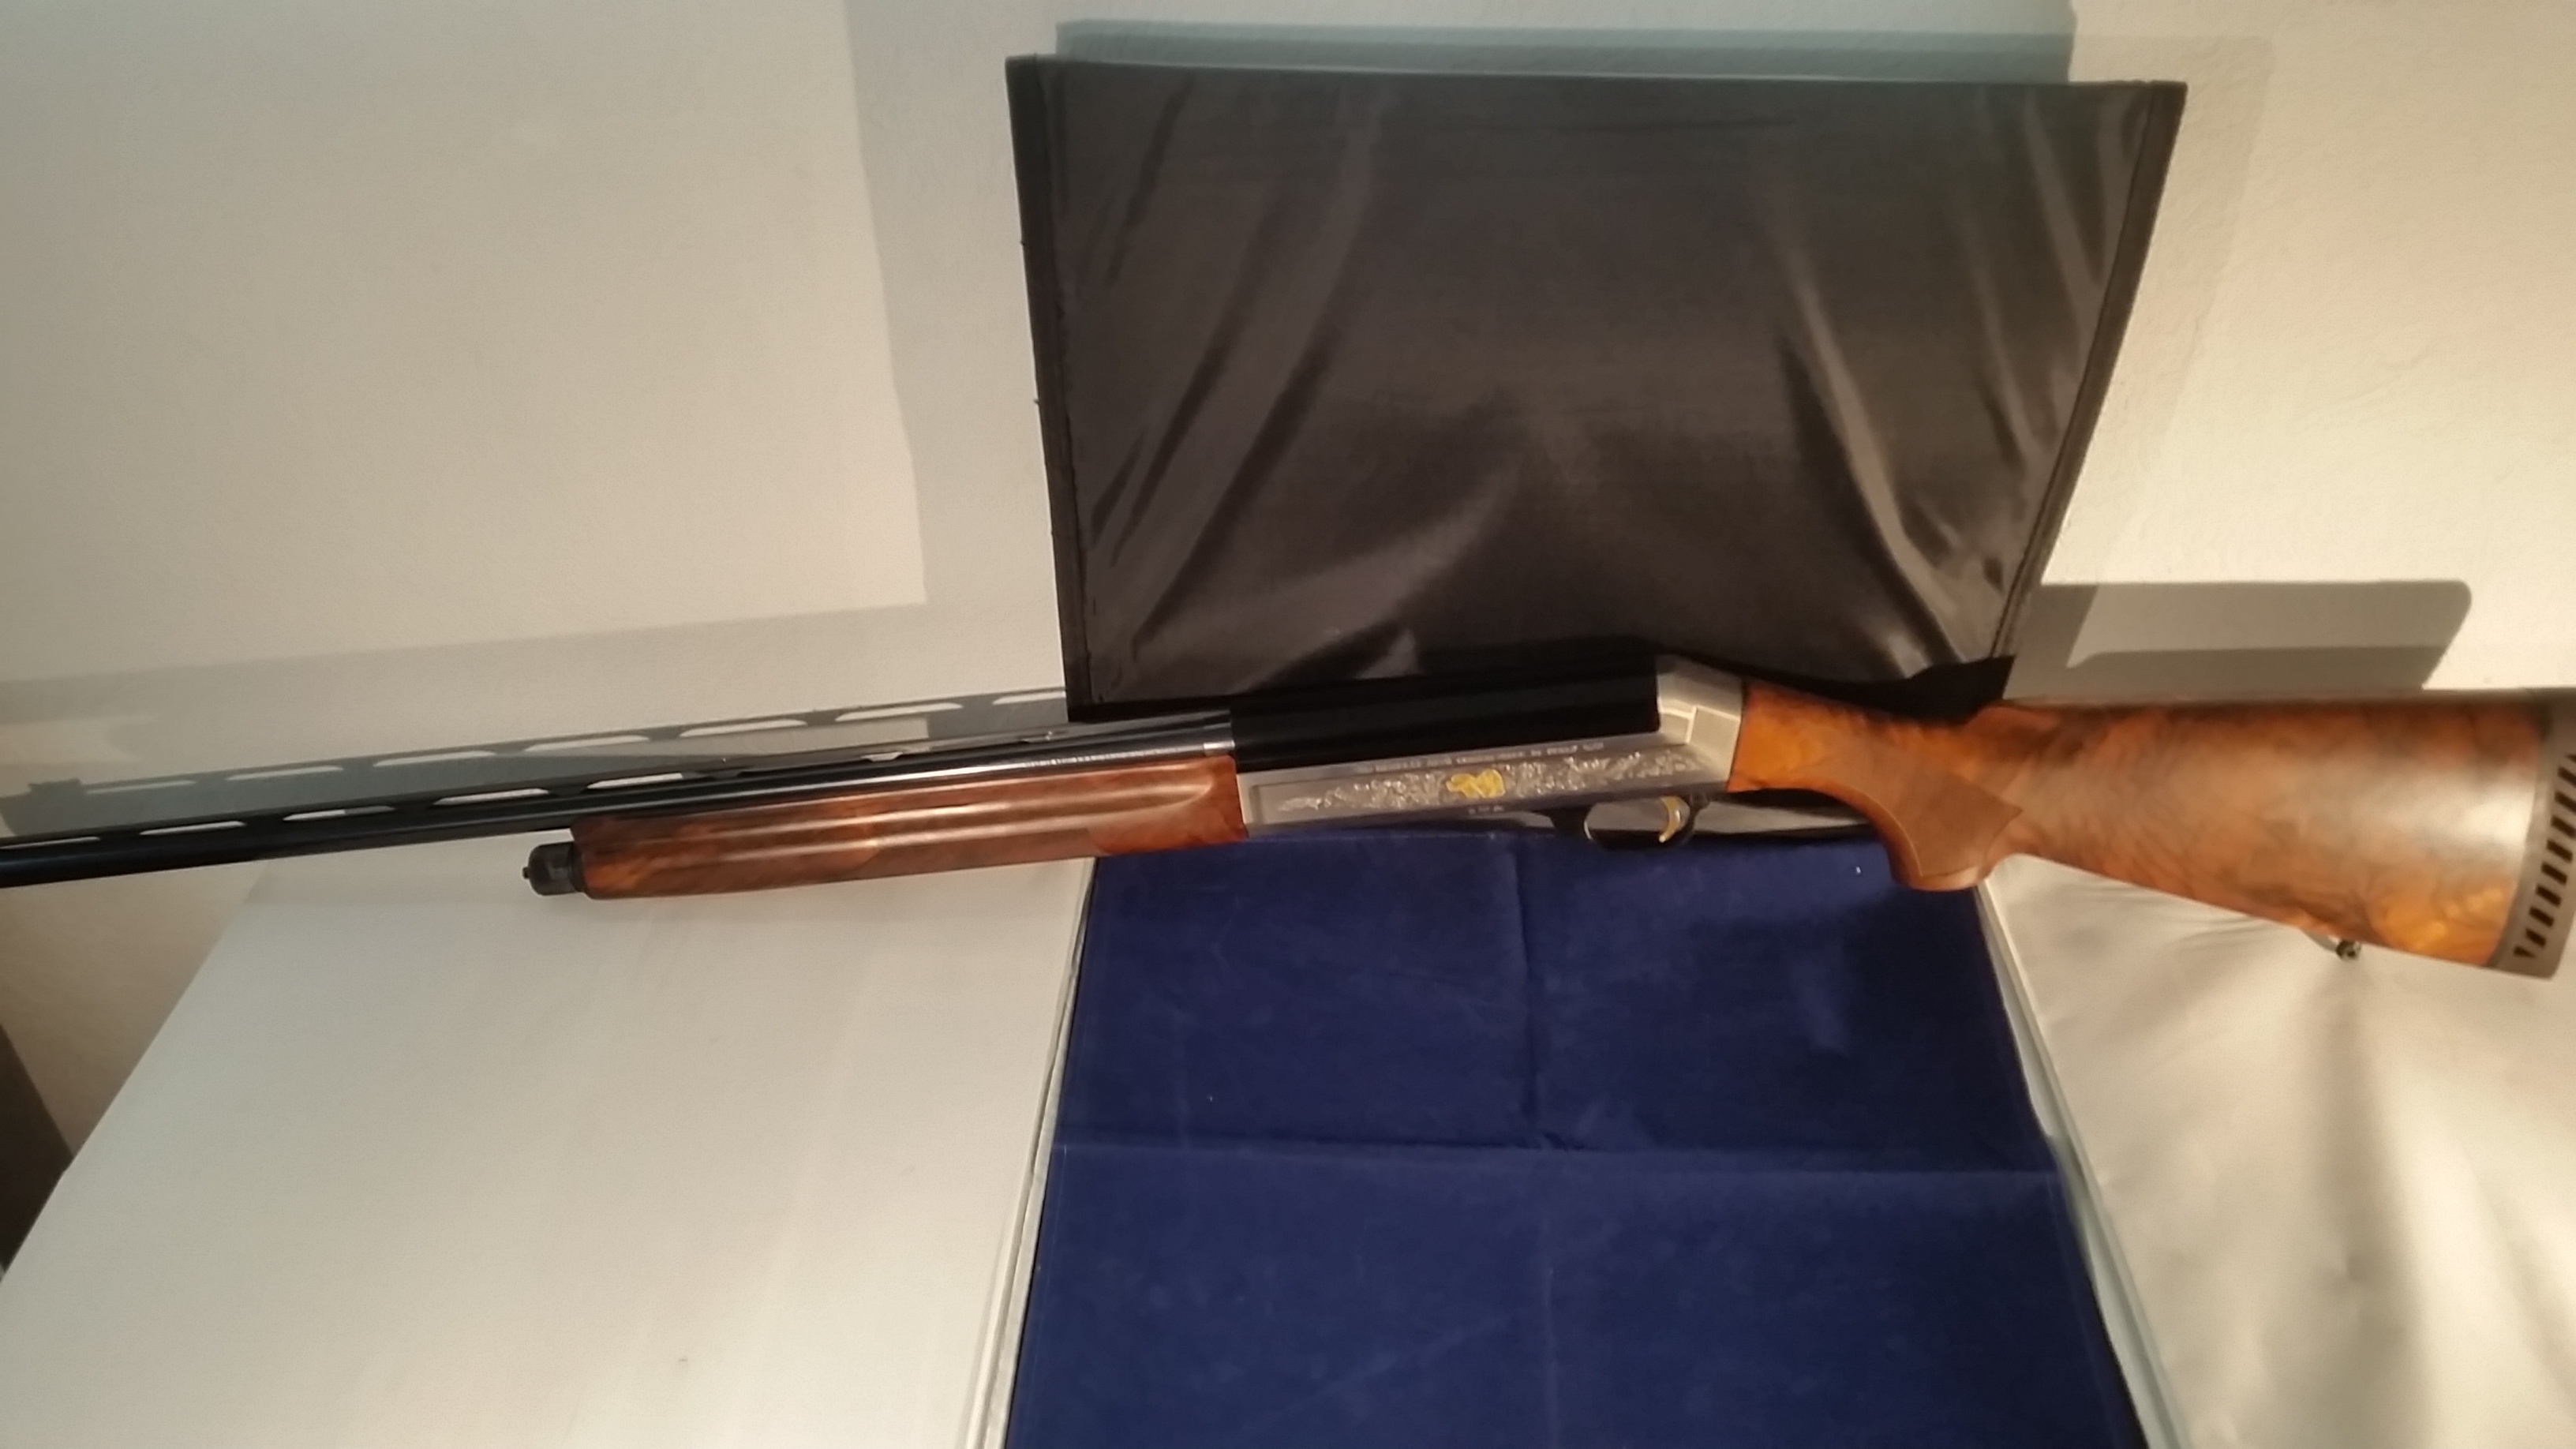  Benelli exclusive cal.20